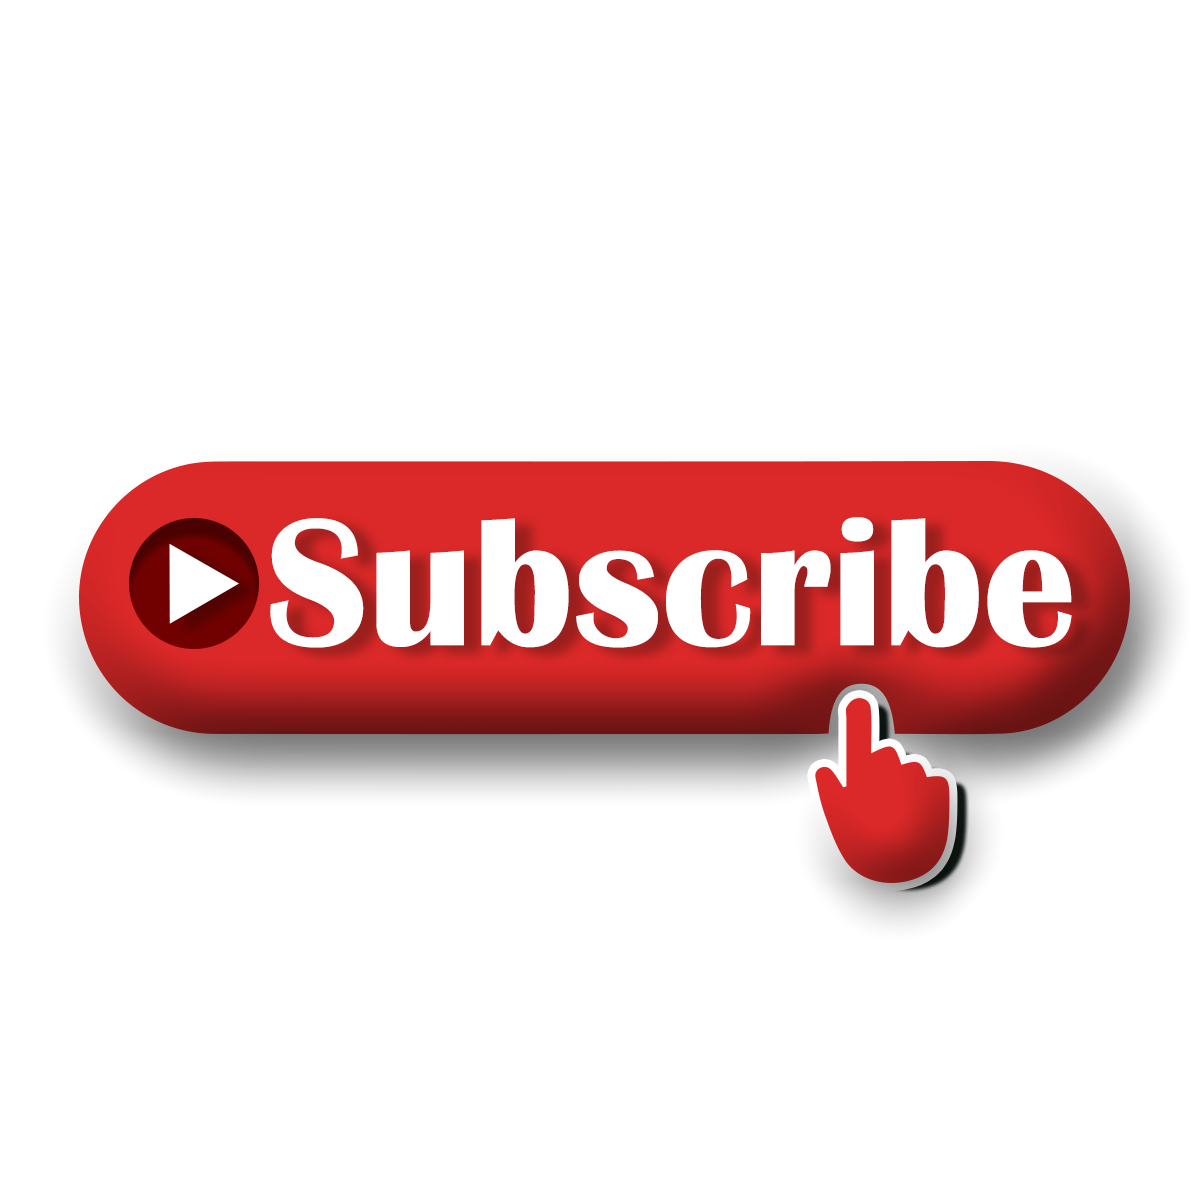 Subscribe Button Png Png Play